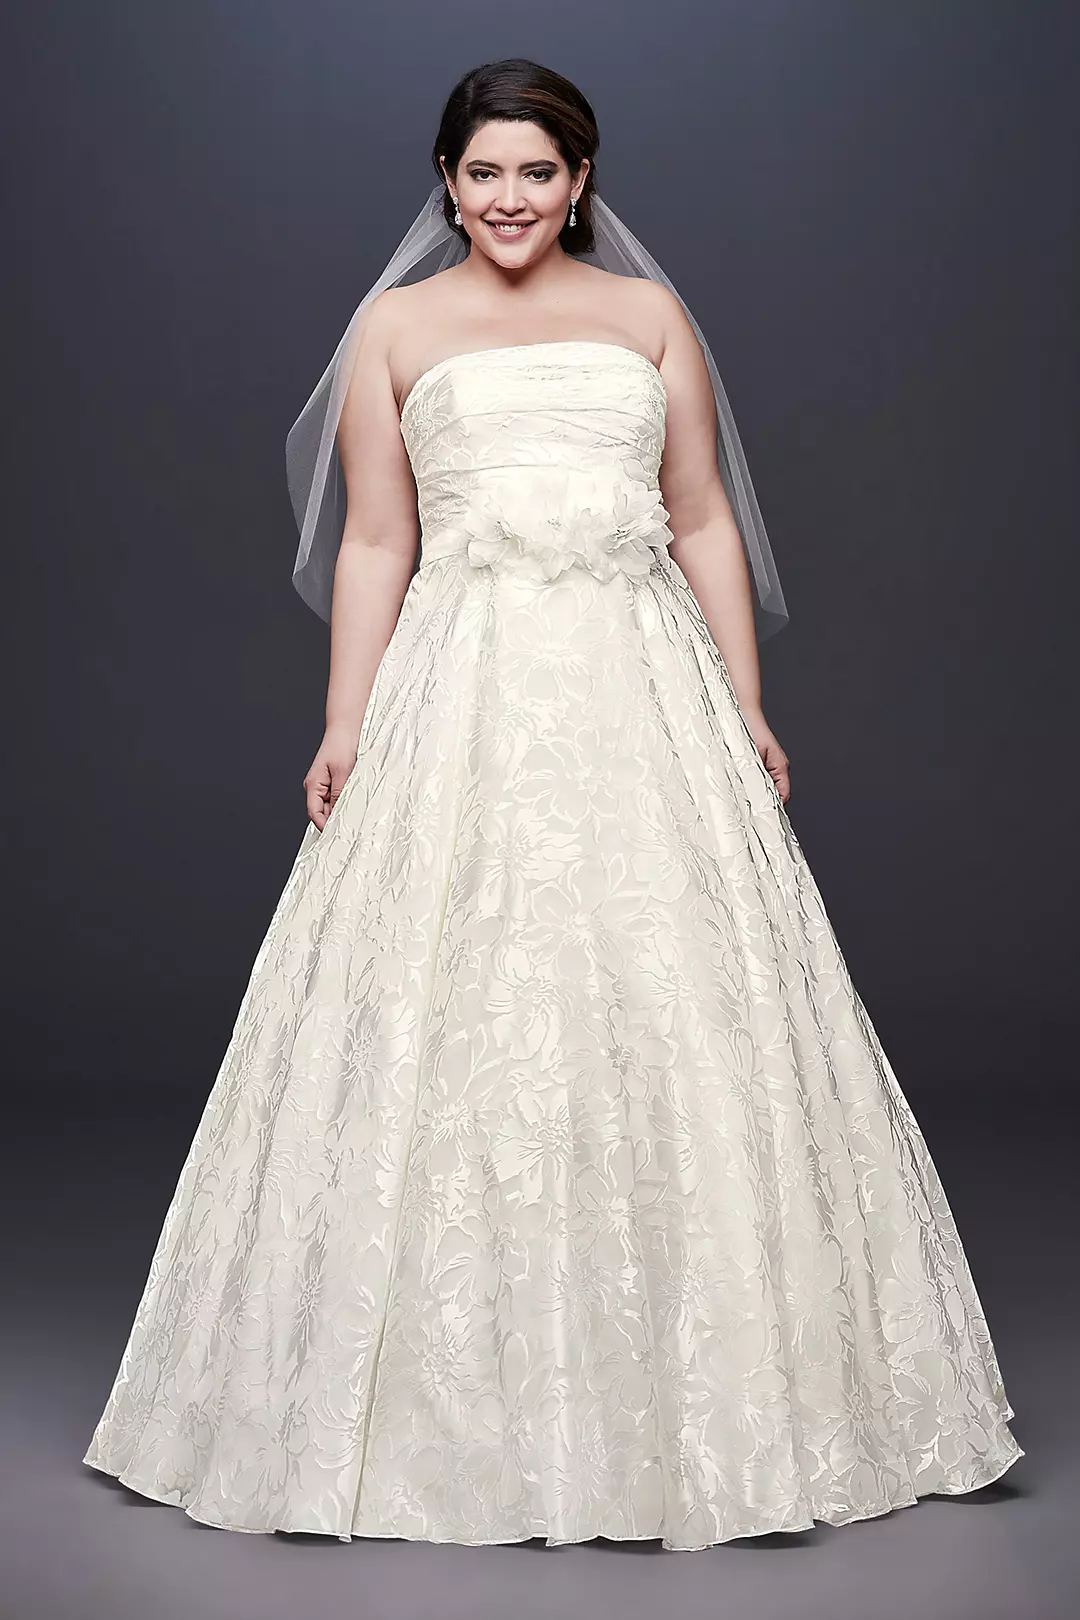 As-Is Printed A-line Plus Size Wedding Dress Image